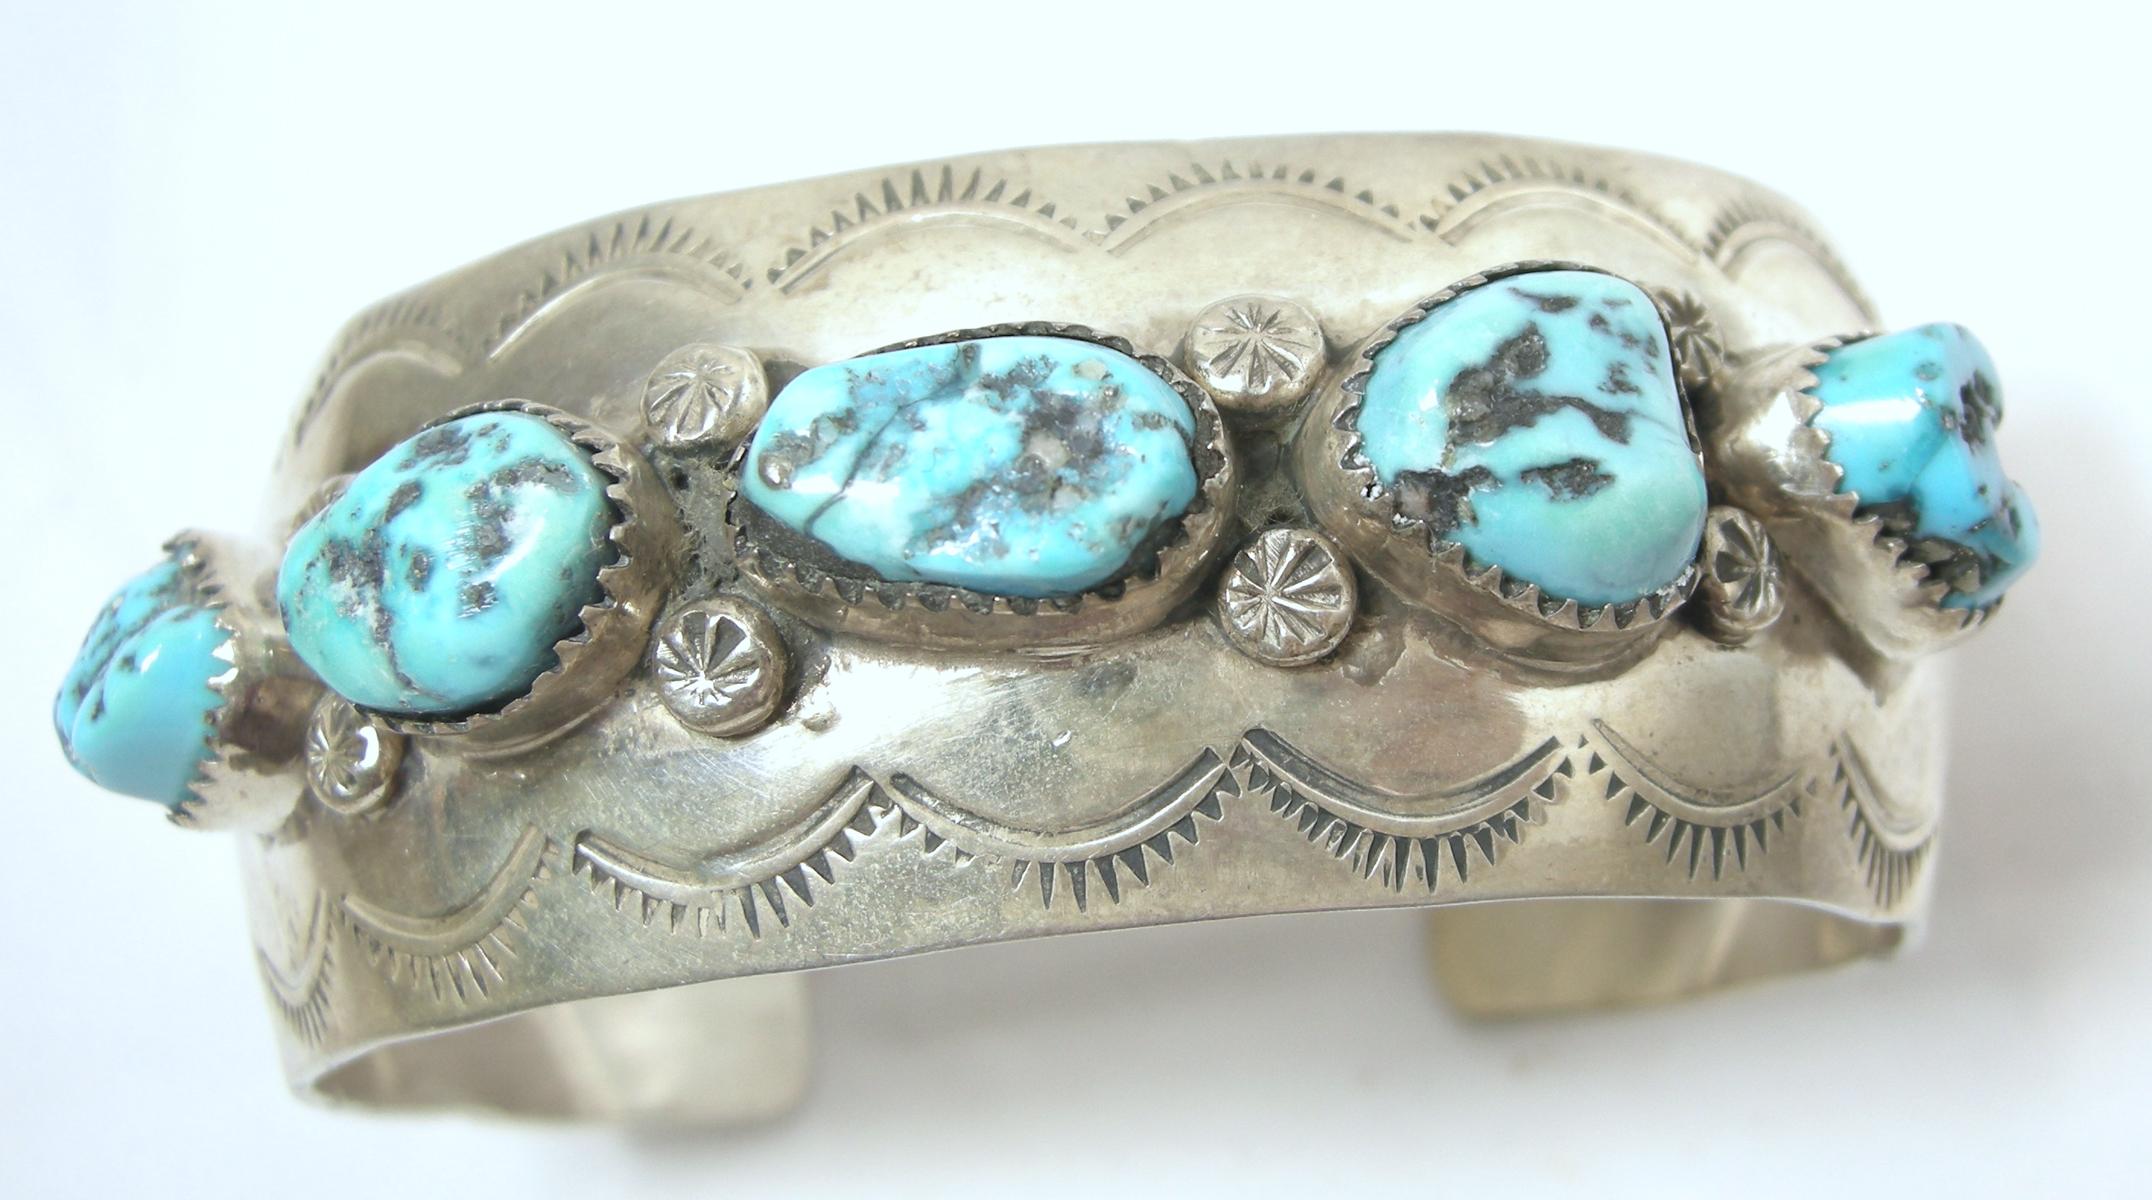 This vintage sterling silver cuff bracelet has turquoise nuggets in the front. In excellent condition, this cuff bracelet measures 7” x 1”.